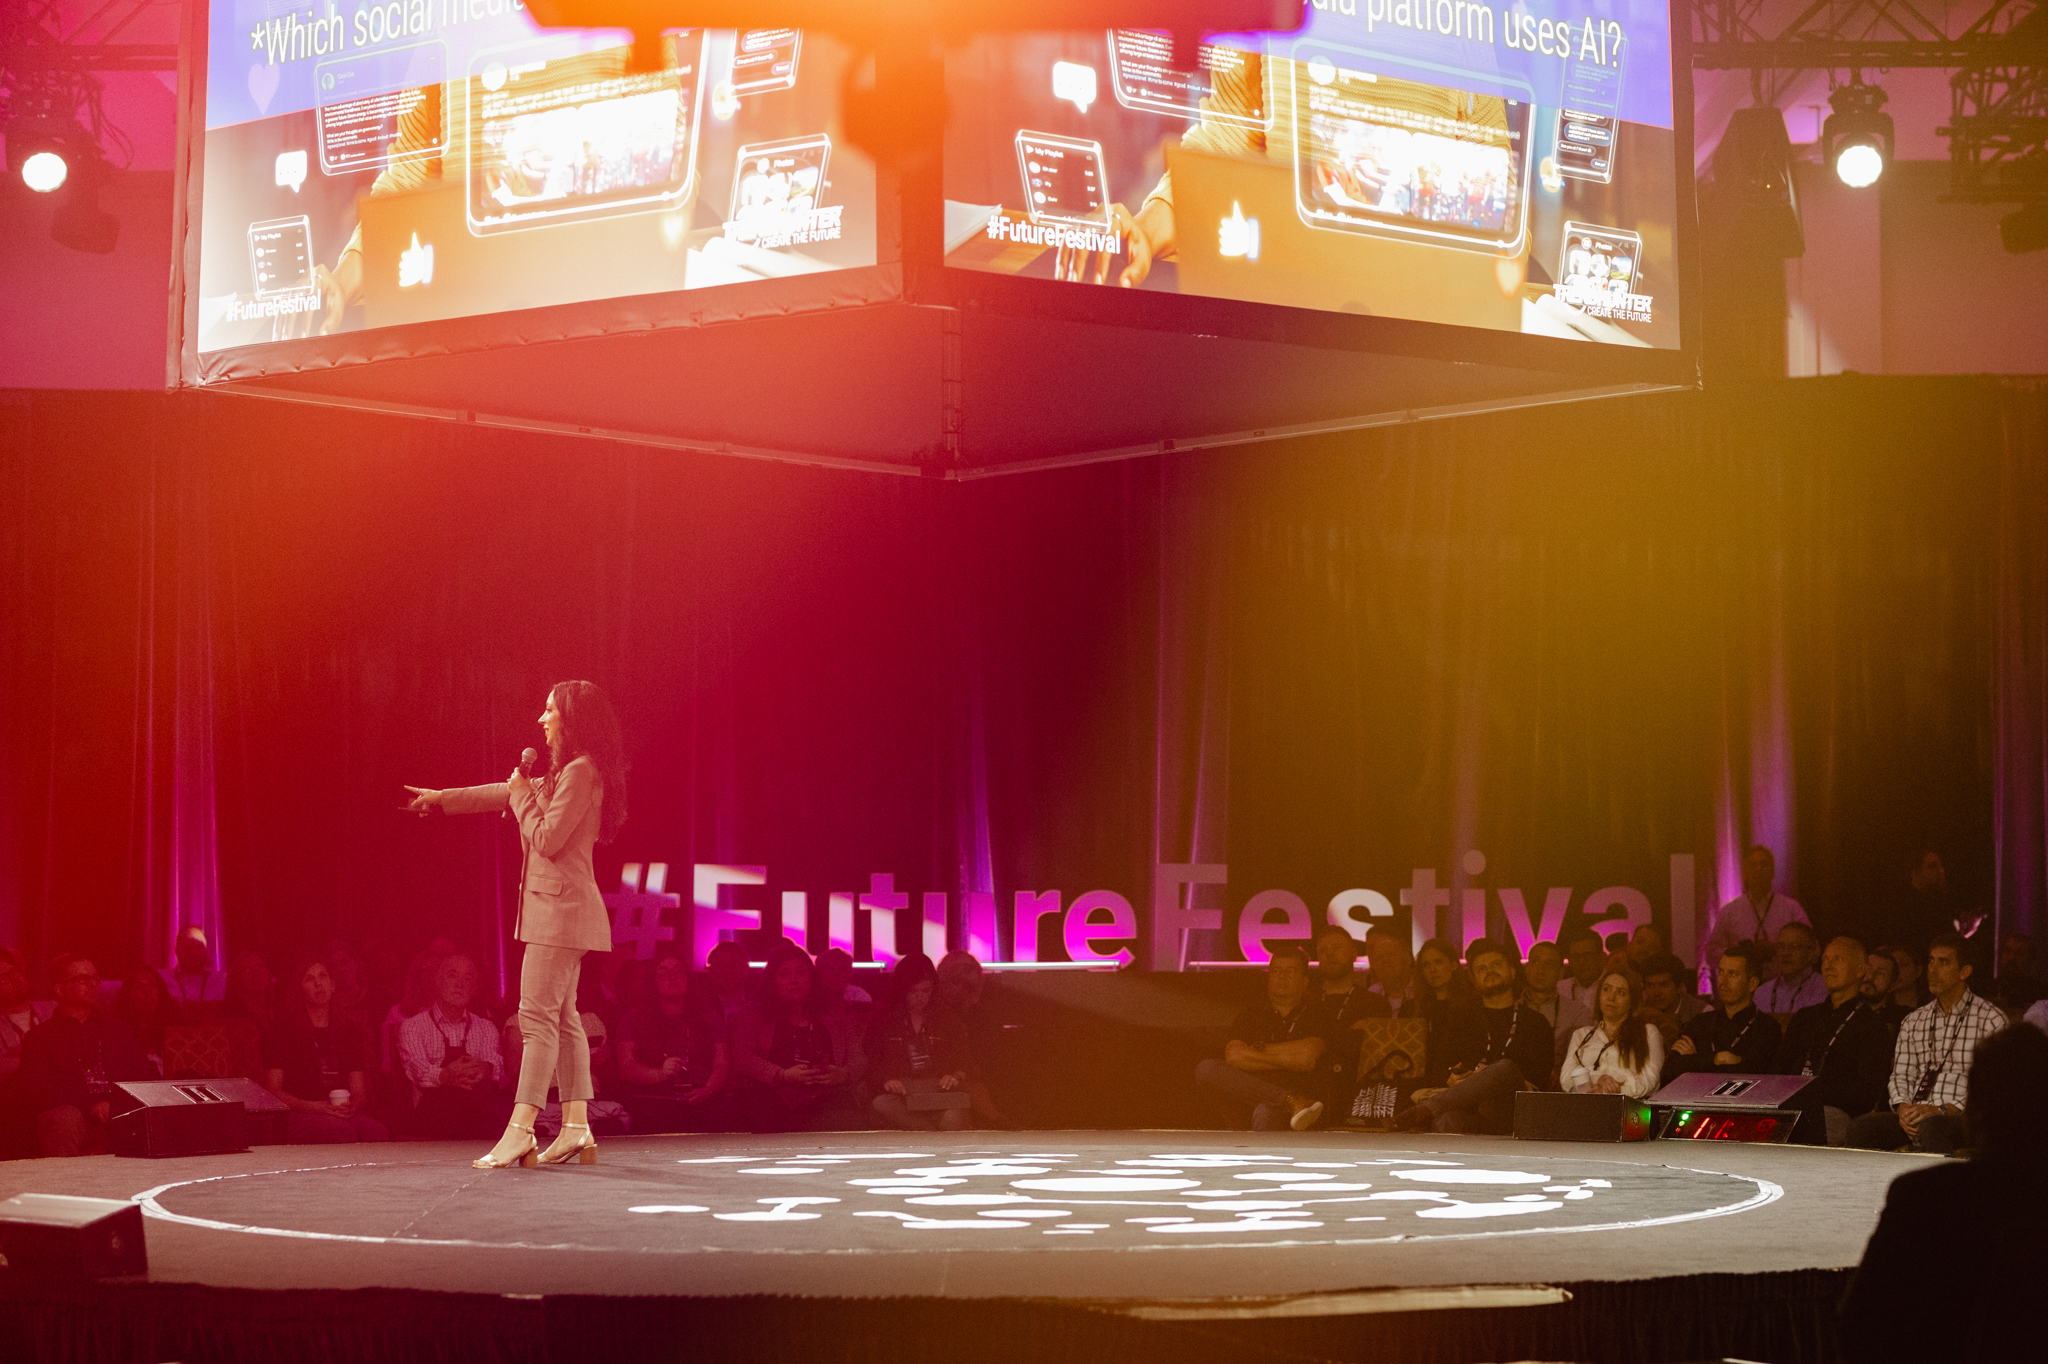 Event photography: A woman standing on stage capturing mesmerizing moments under the spotlight, with a captivating large screen as the backdrop.